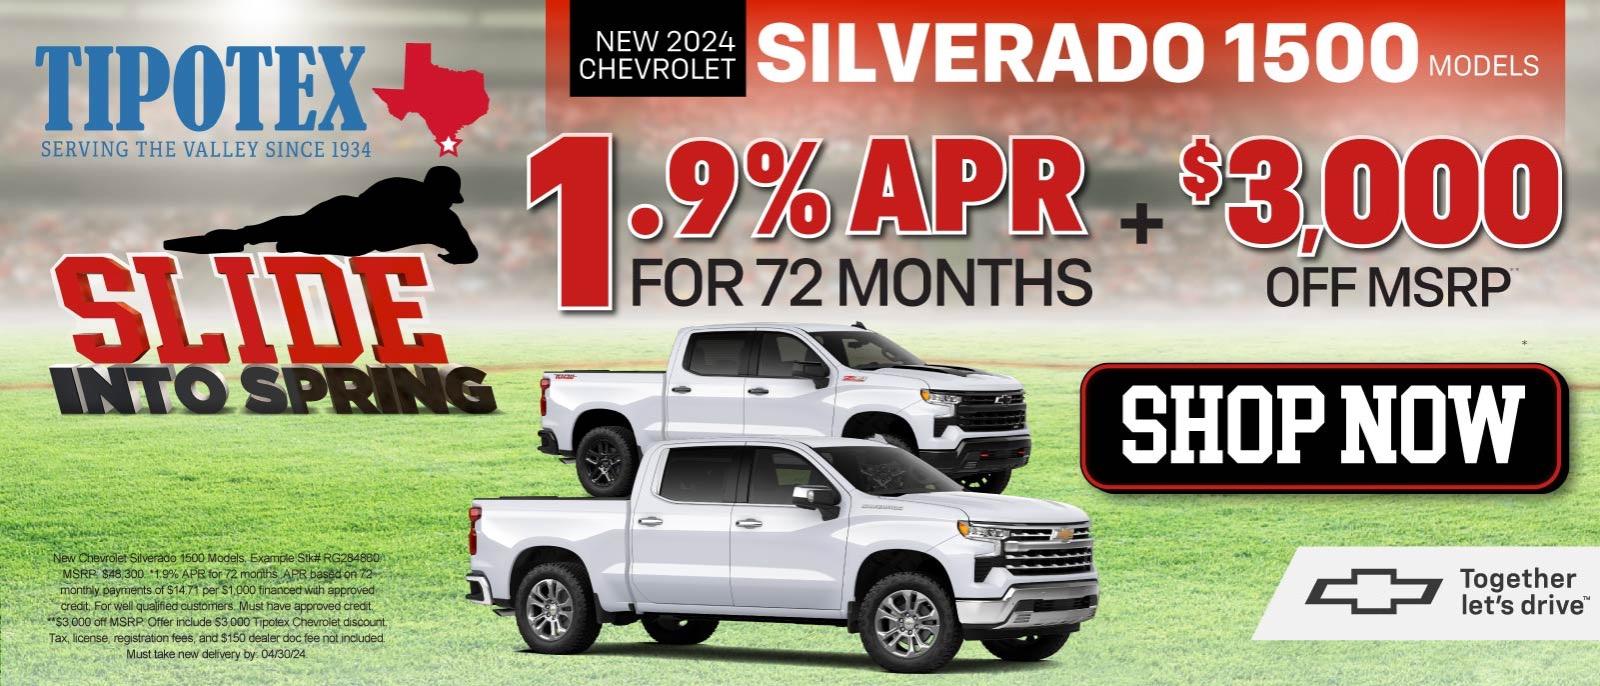 New 2024 Chevrolet Silverado 1500 Models - 1.9% APR For 72 Months* Plus $3,000 Off MSRP** - Act Now